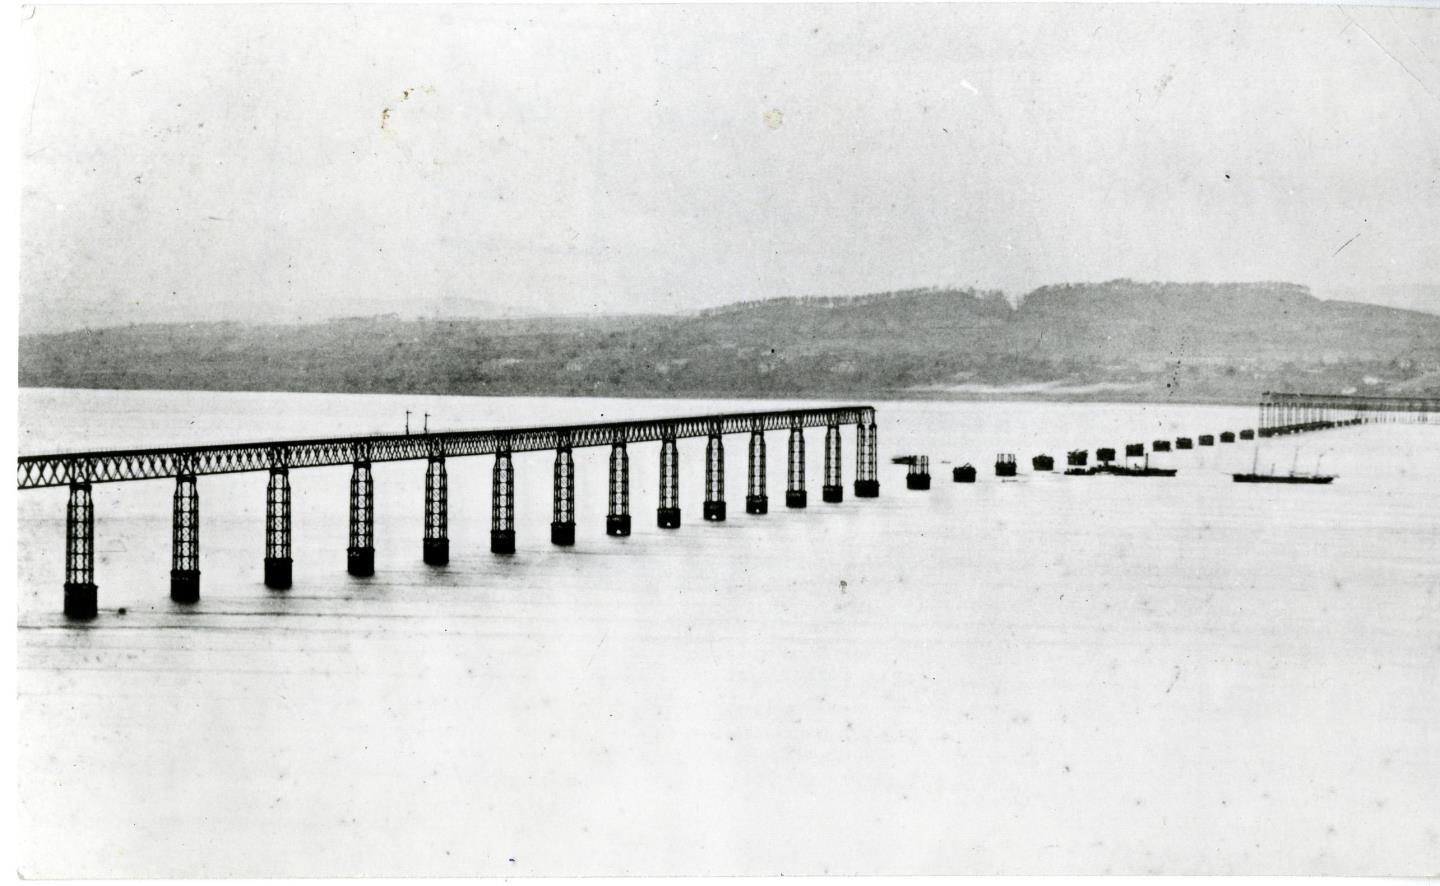 The Tay Rail bridge as it stood after the disaster, with a section of the bridge completely missing.